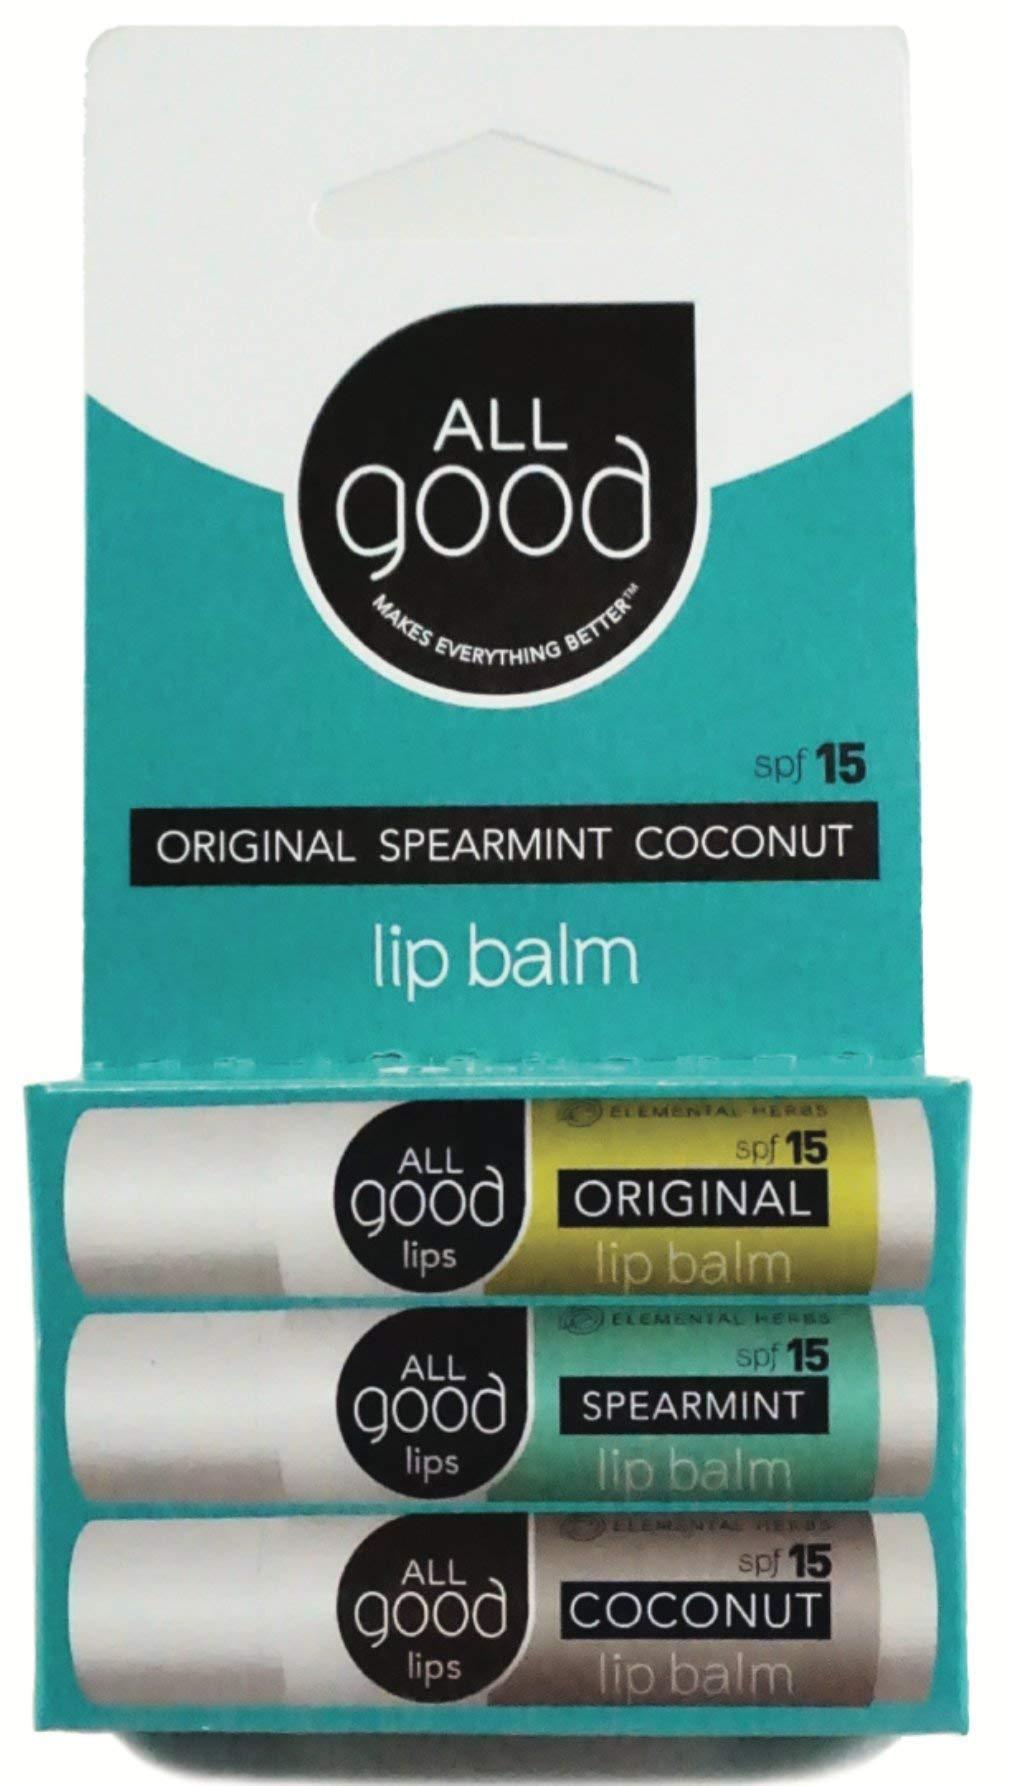 [Australia] - All Good SPF 15 Lip Balm for Soft Smooth Lips - Calendula, Lavender, Olive Oil, Beeswax, Vitamin E | Zinc Oxide Sun Protection (3-Pack) (Original/Spearmint/Coconut) Multi 3 Count (Pack of 1) 